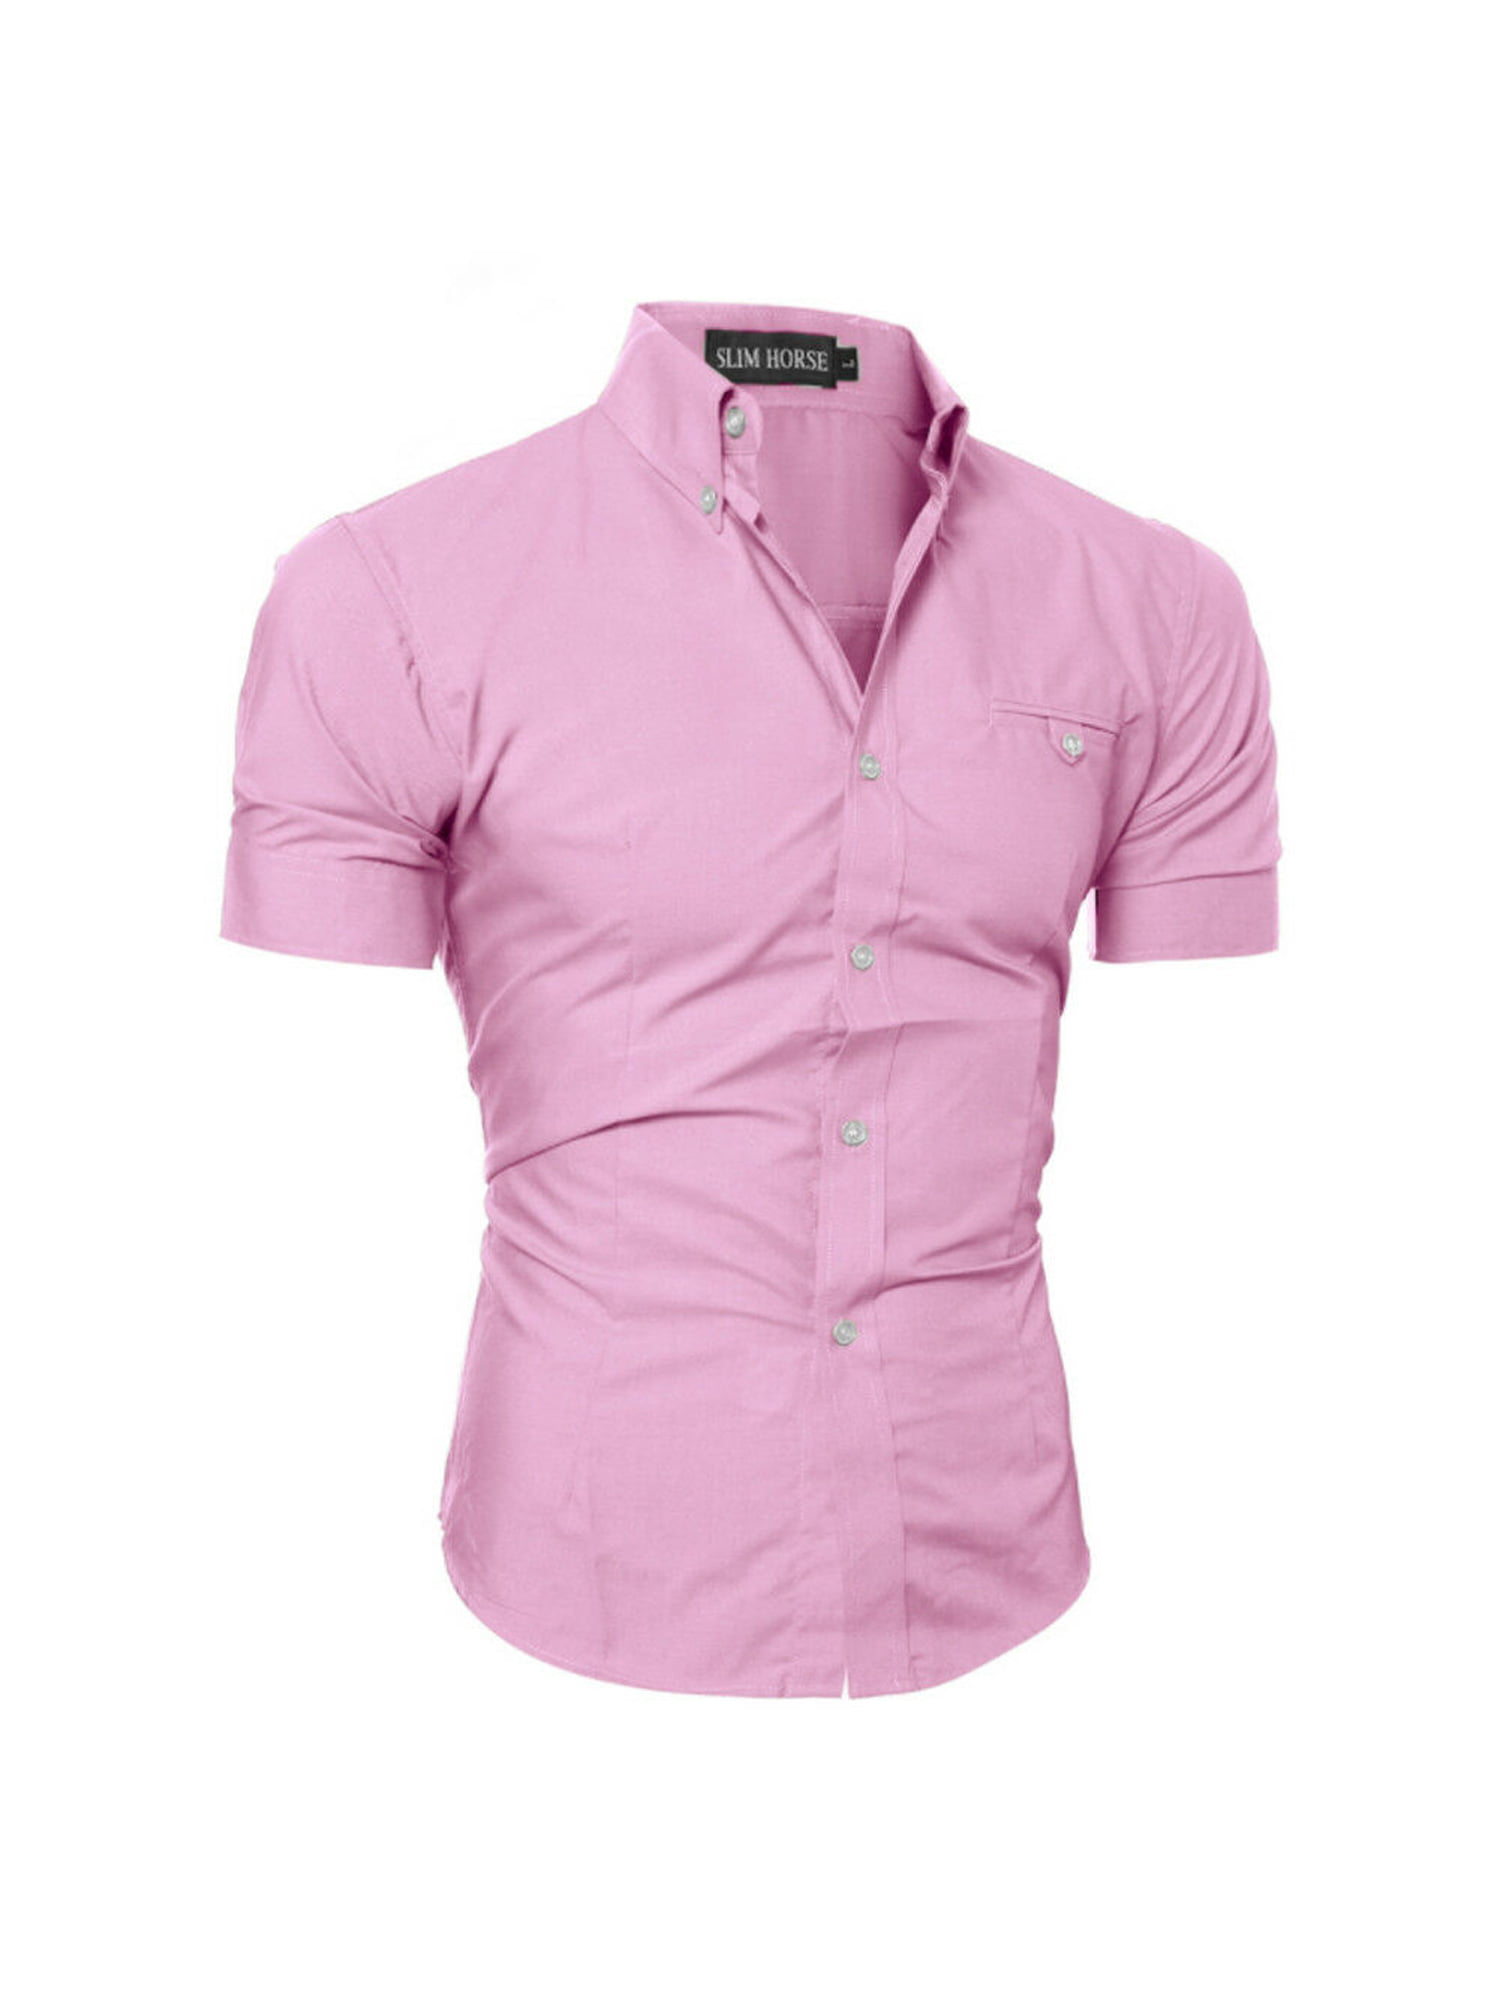 Mens Solid Color Summer Short Sleeve Stylish Slim Button Down Dress Shirts